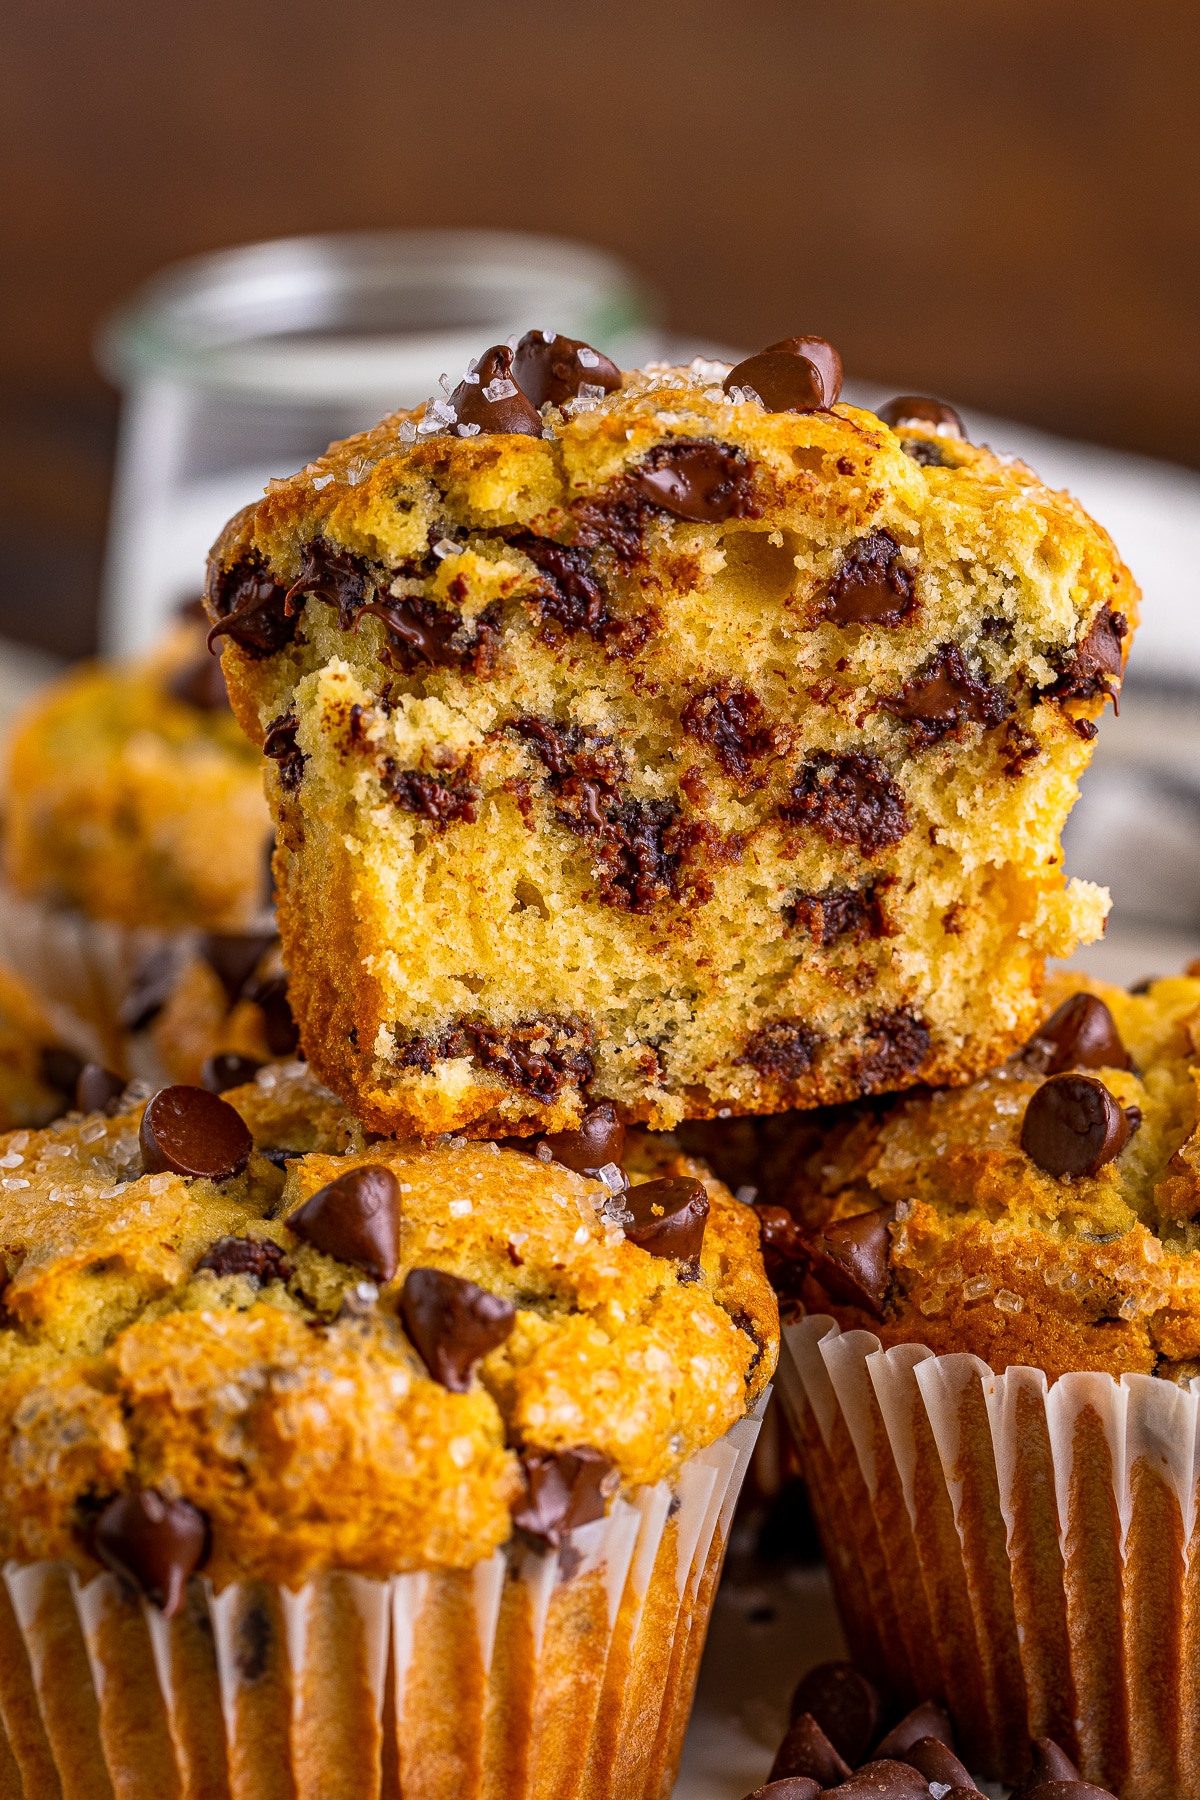 Stack of Easy Chocolate Chip Muffins showing an entire section of one muffin with dark brown background